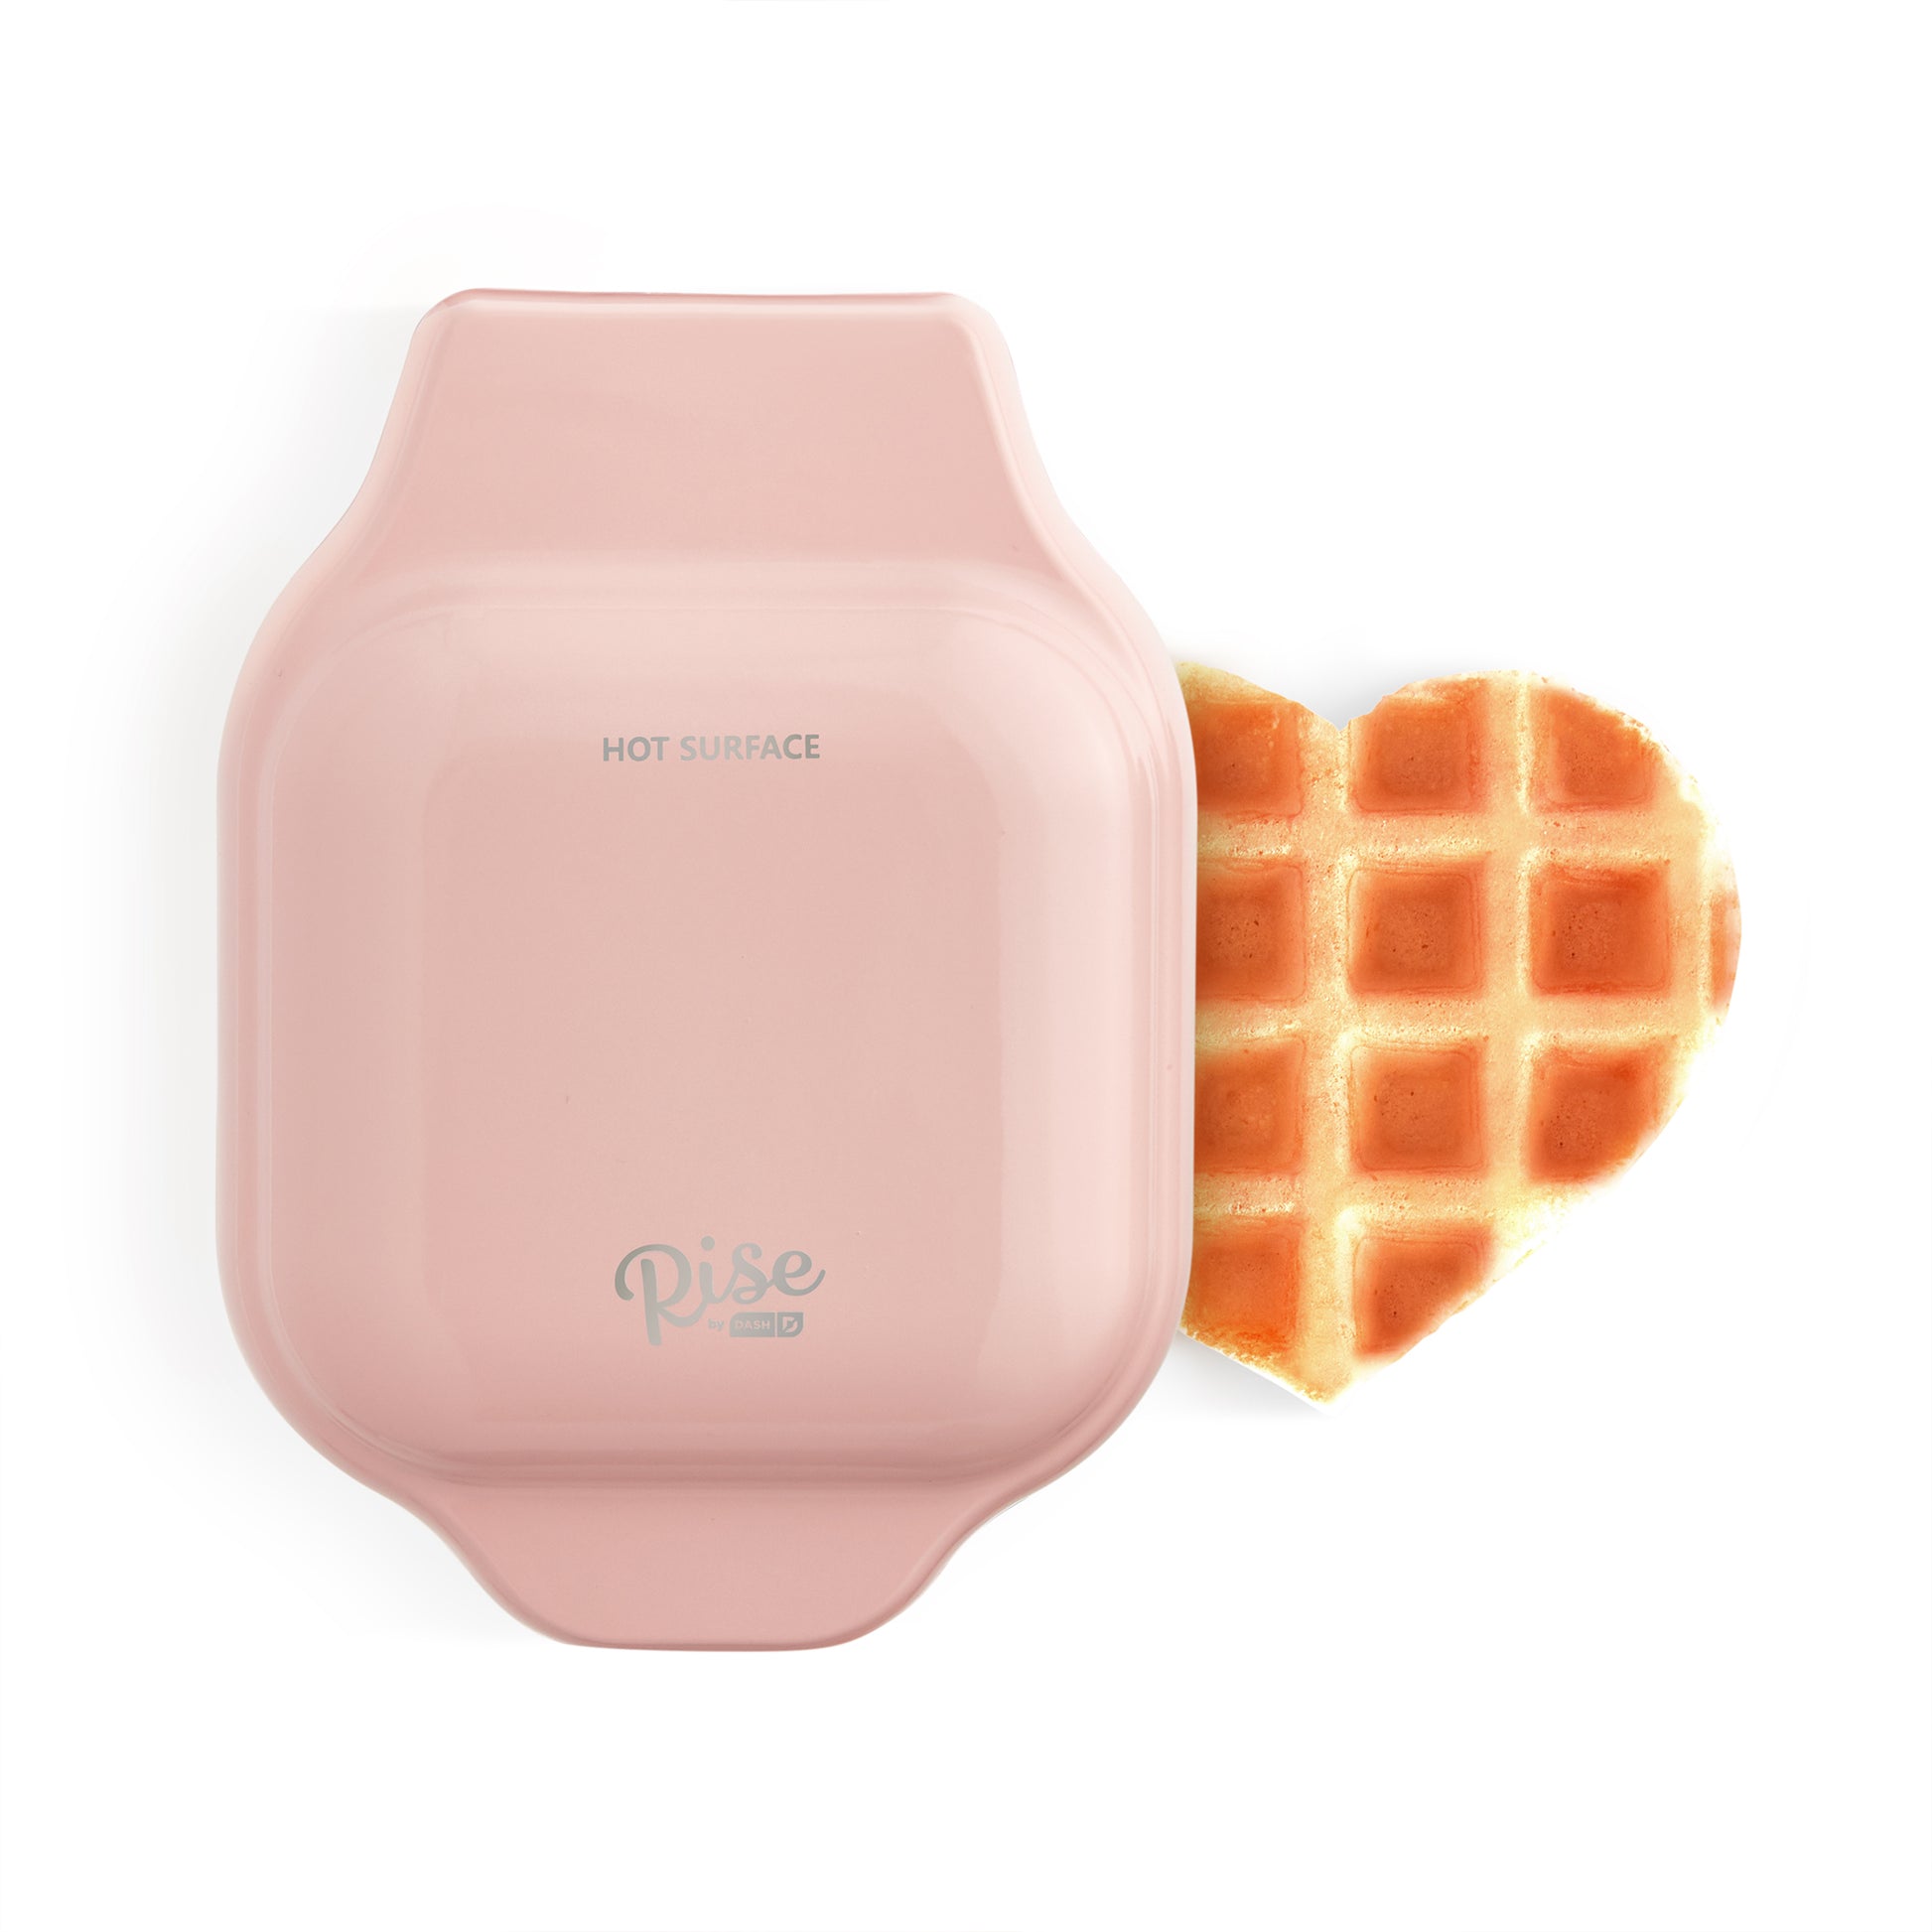 Rise by Dash Heart Mini Waffle Maker Waffle Maker Rise by Dash   